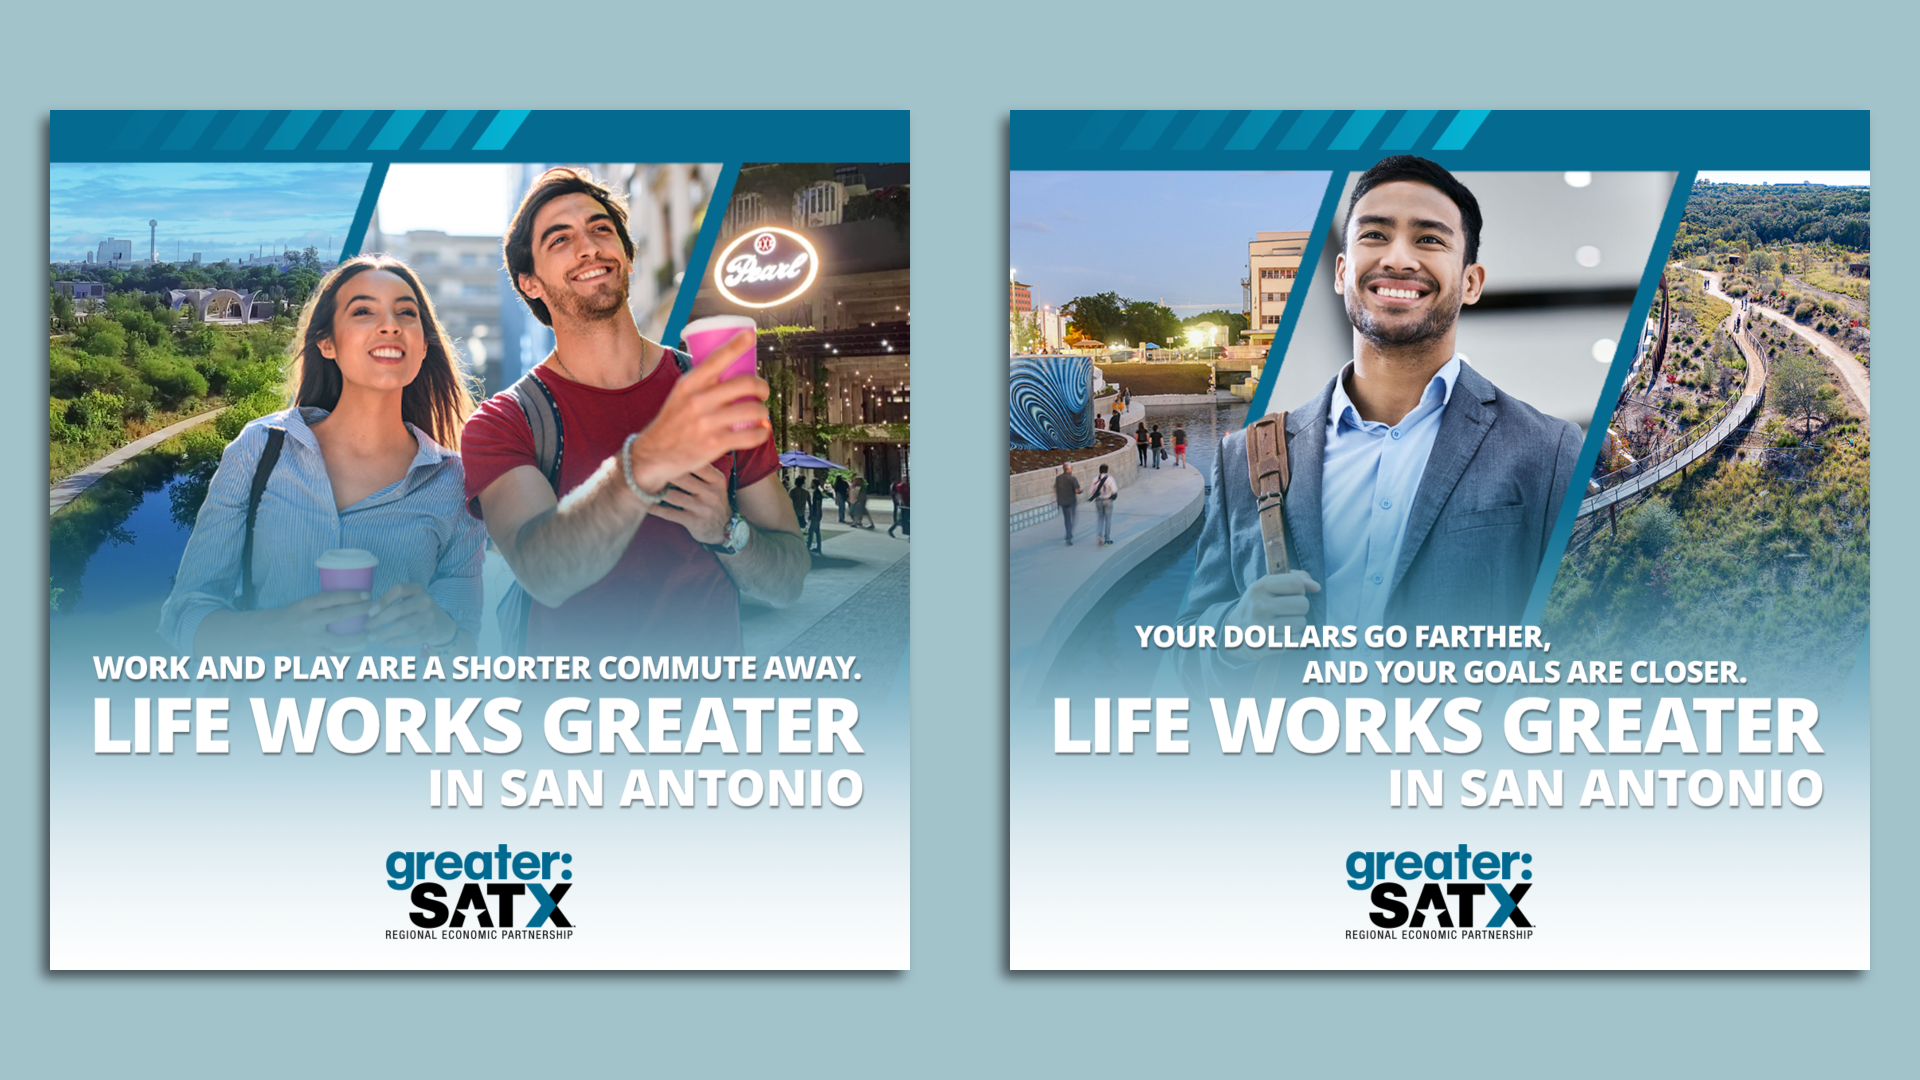 Two images show people enjoying life in San Antonio, with background images of Pearl and the Tobin Land Bridge.